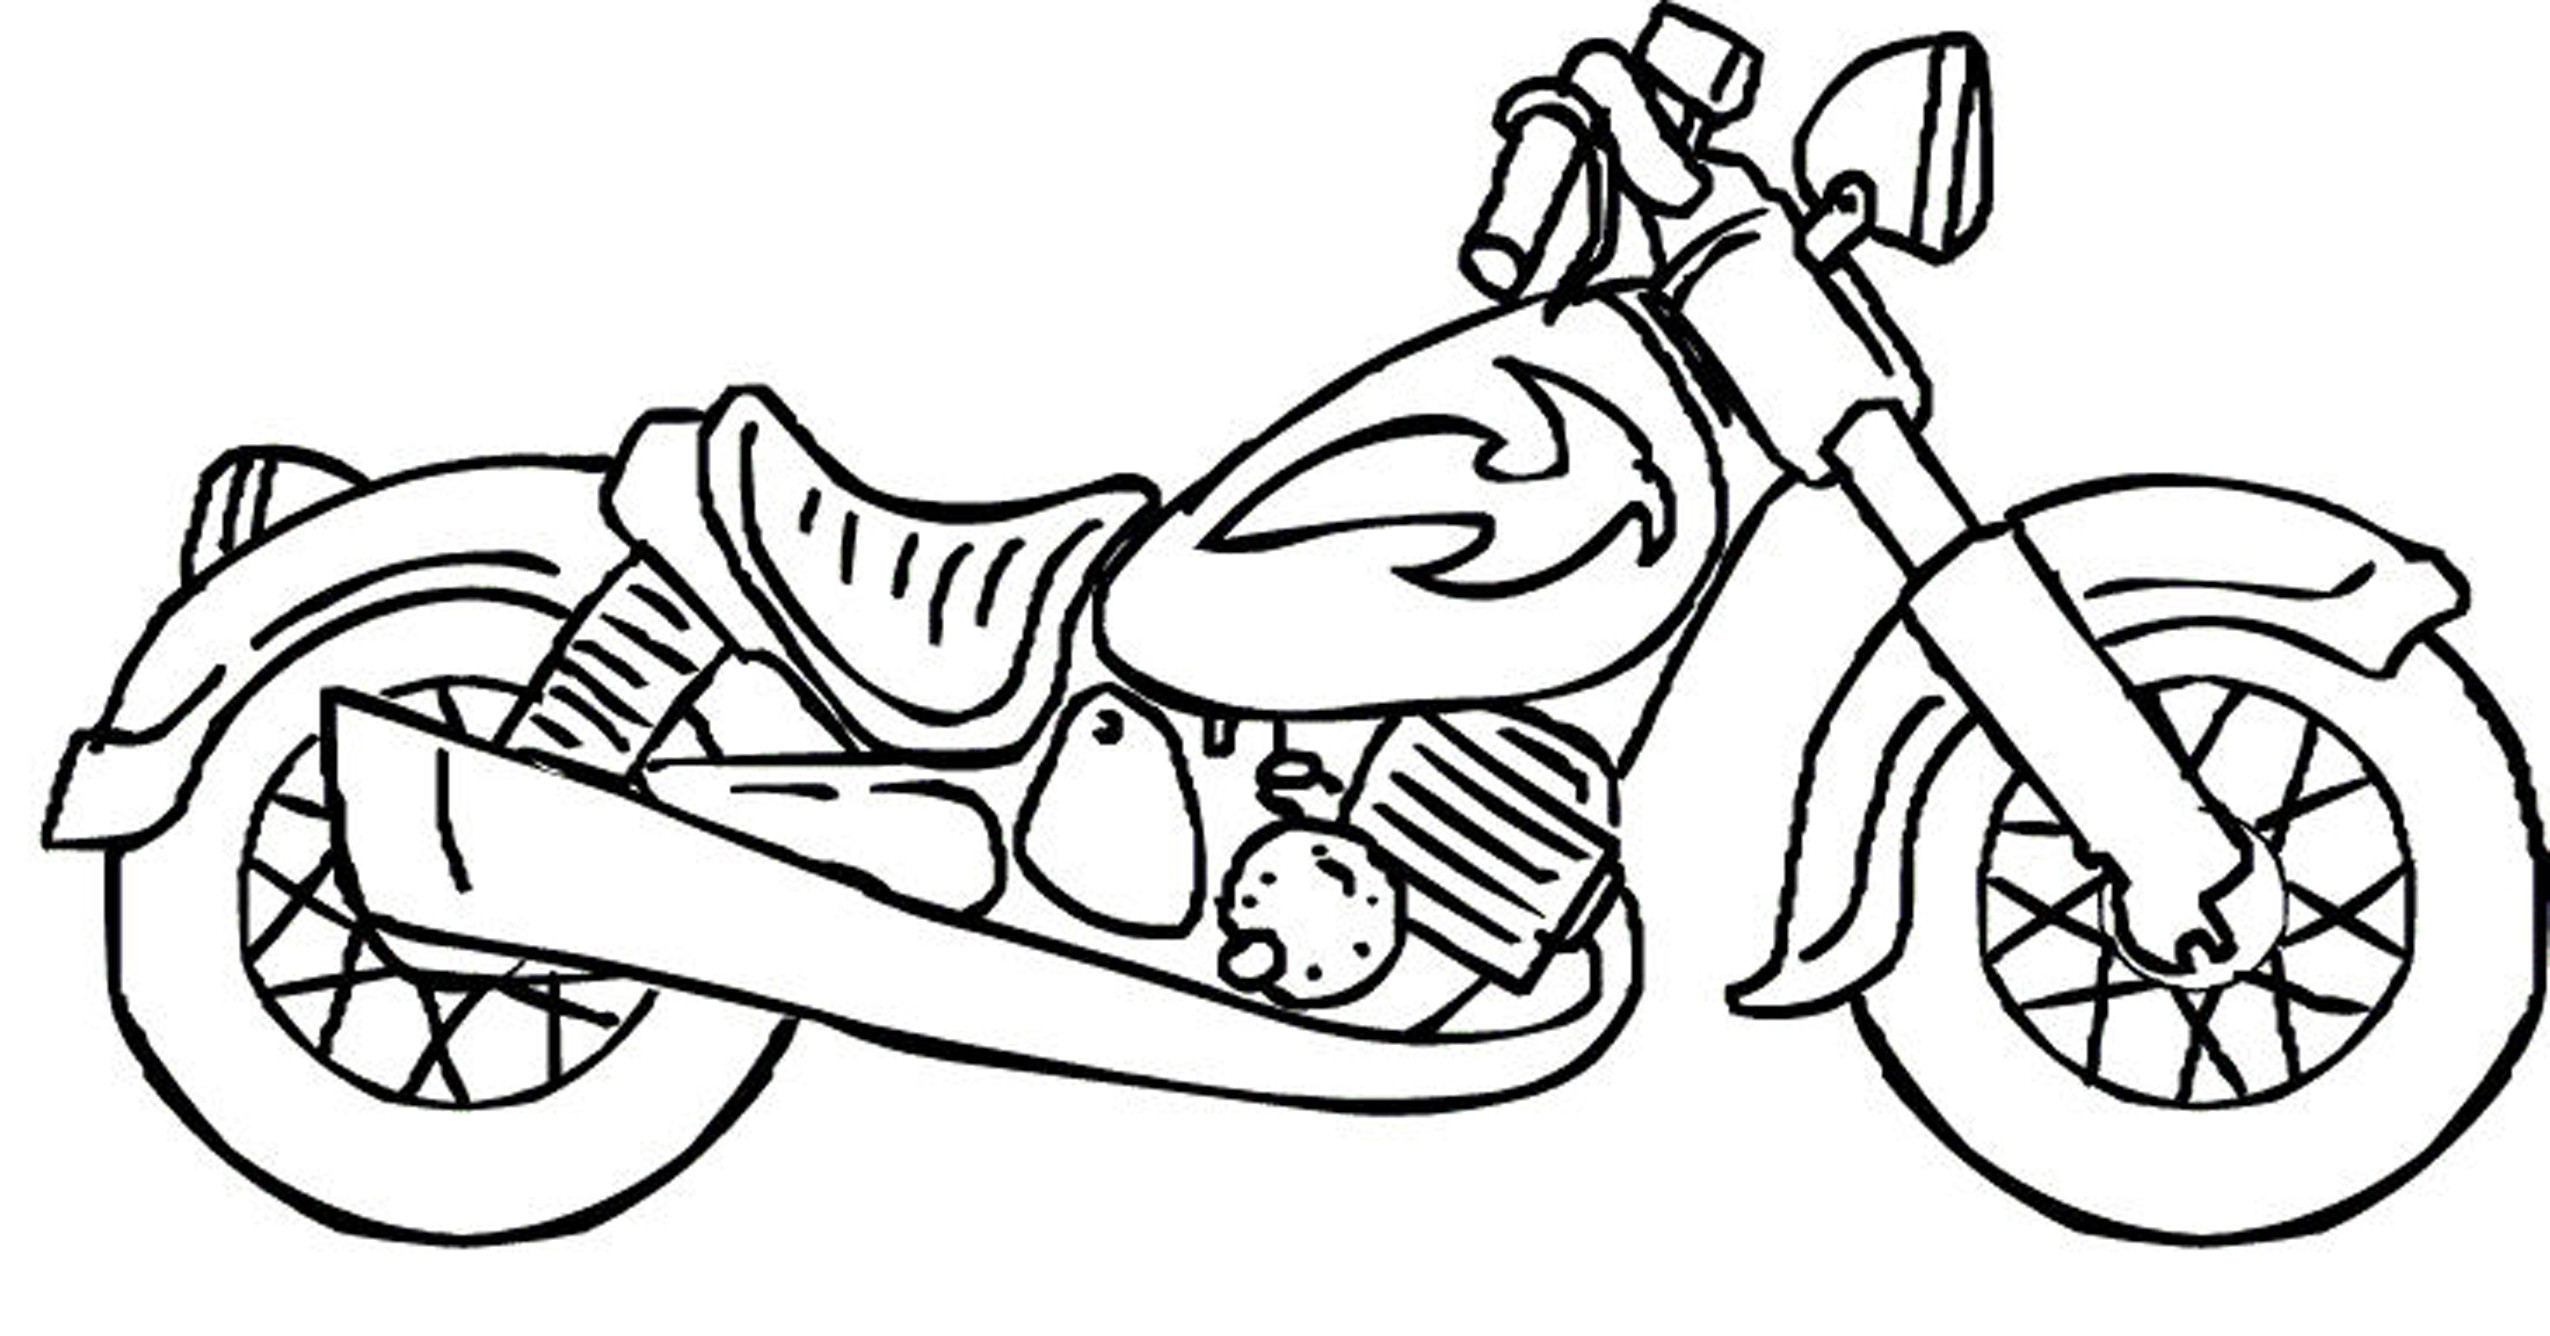 Coloring Pages For Boys Motorcycle
 Boy Coloring Pages for Free 24 Sheets Gianfreda